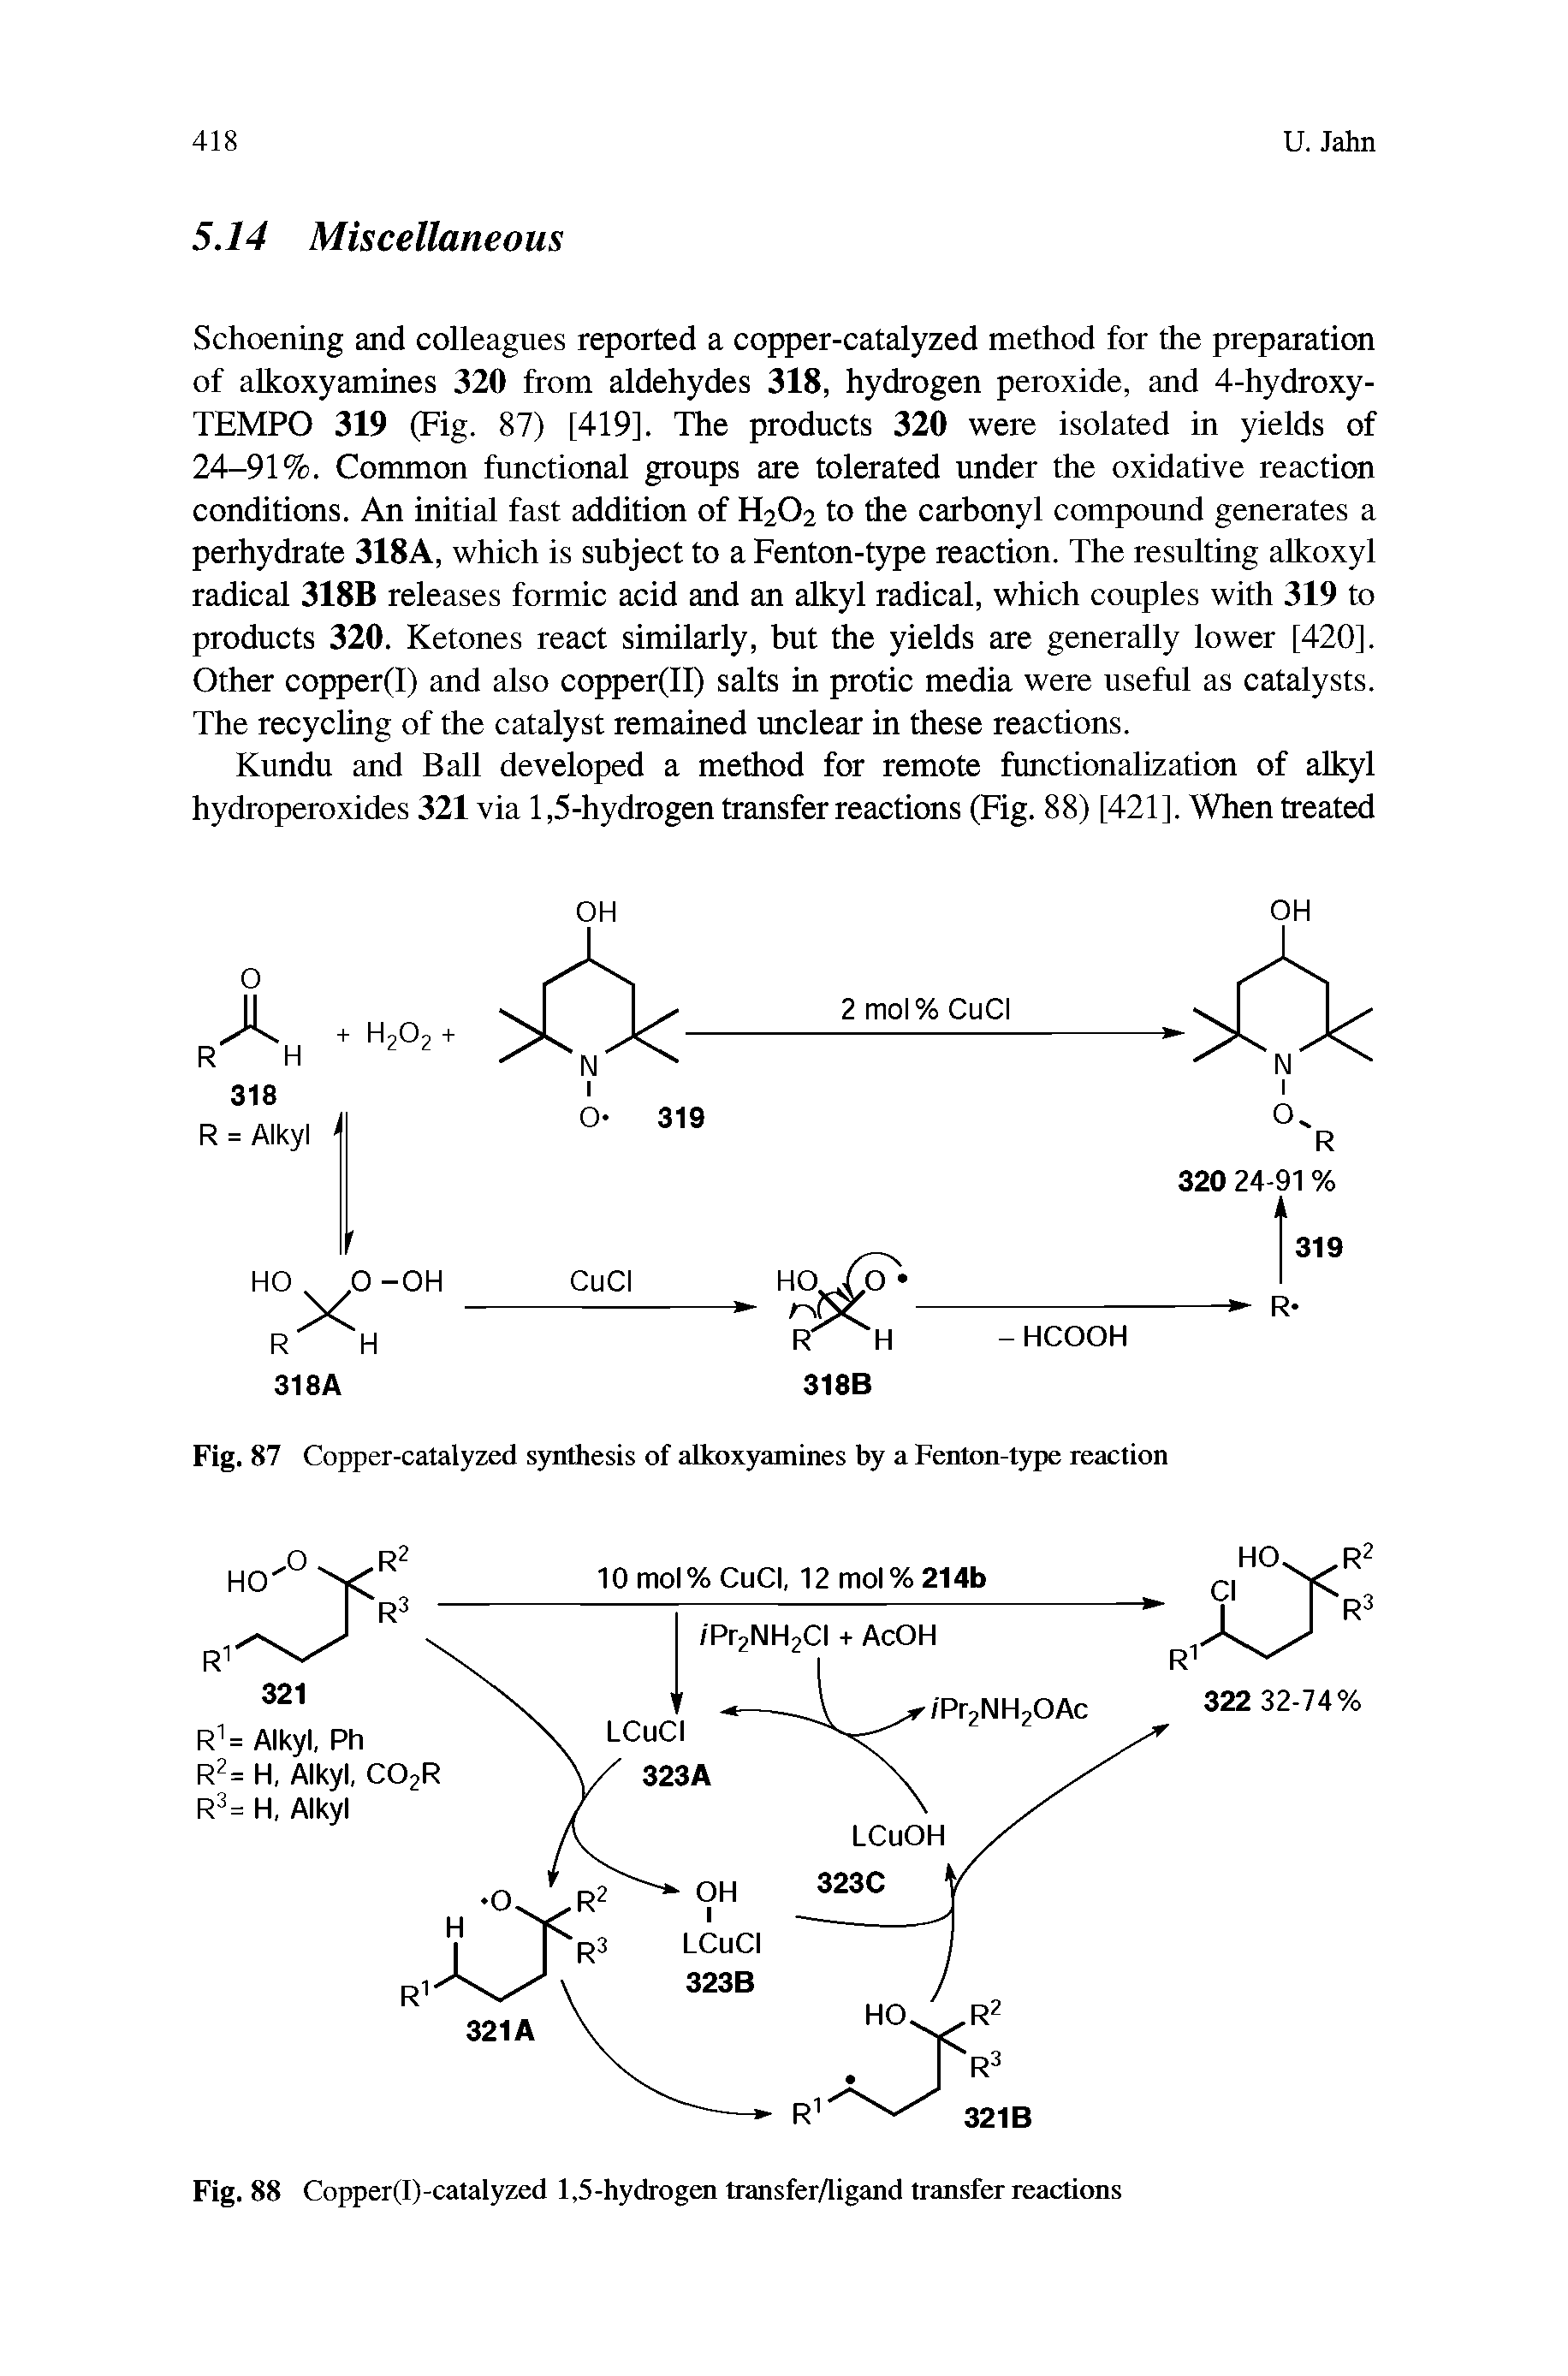 Fig. 87 Copper-catalyzed synthesis of alkoxyamines by a Fenton-type reaction...